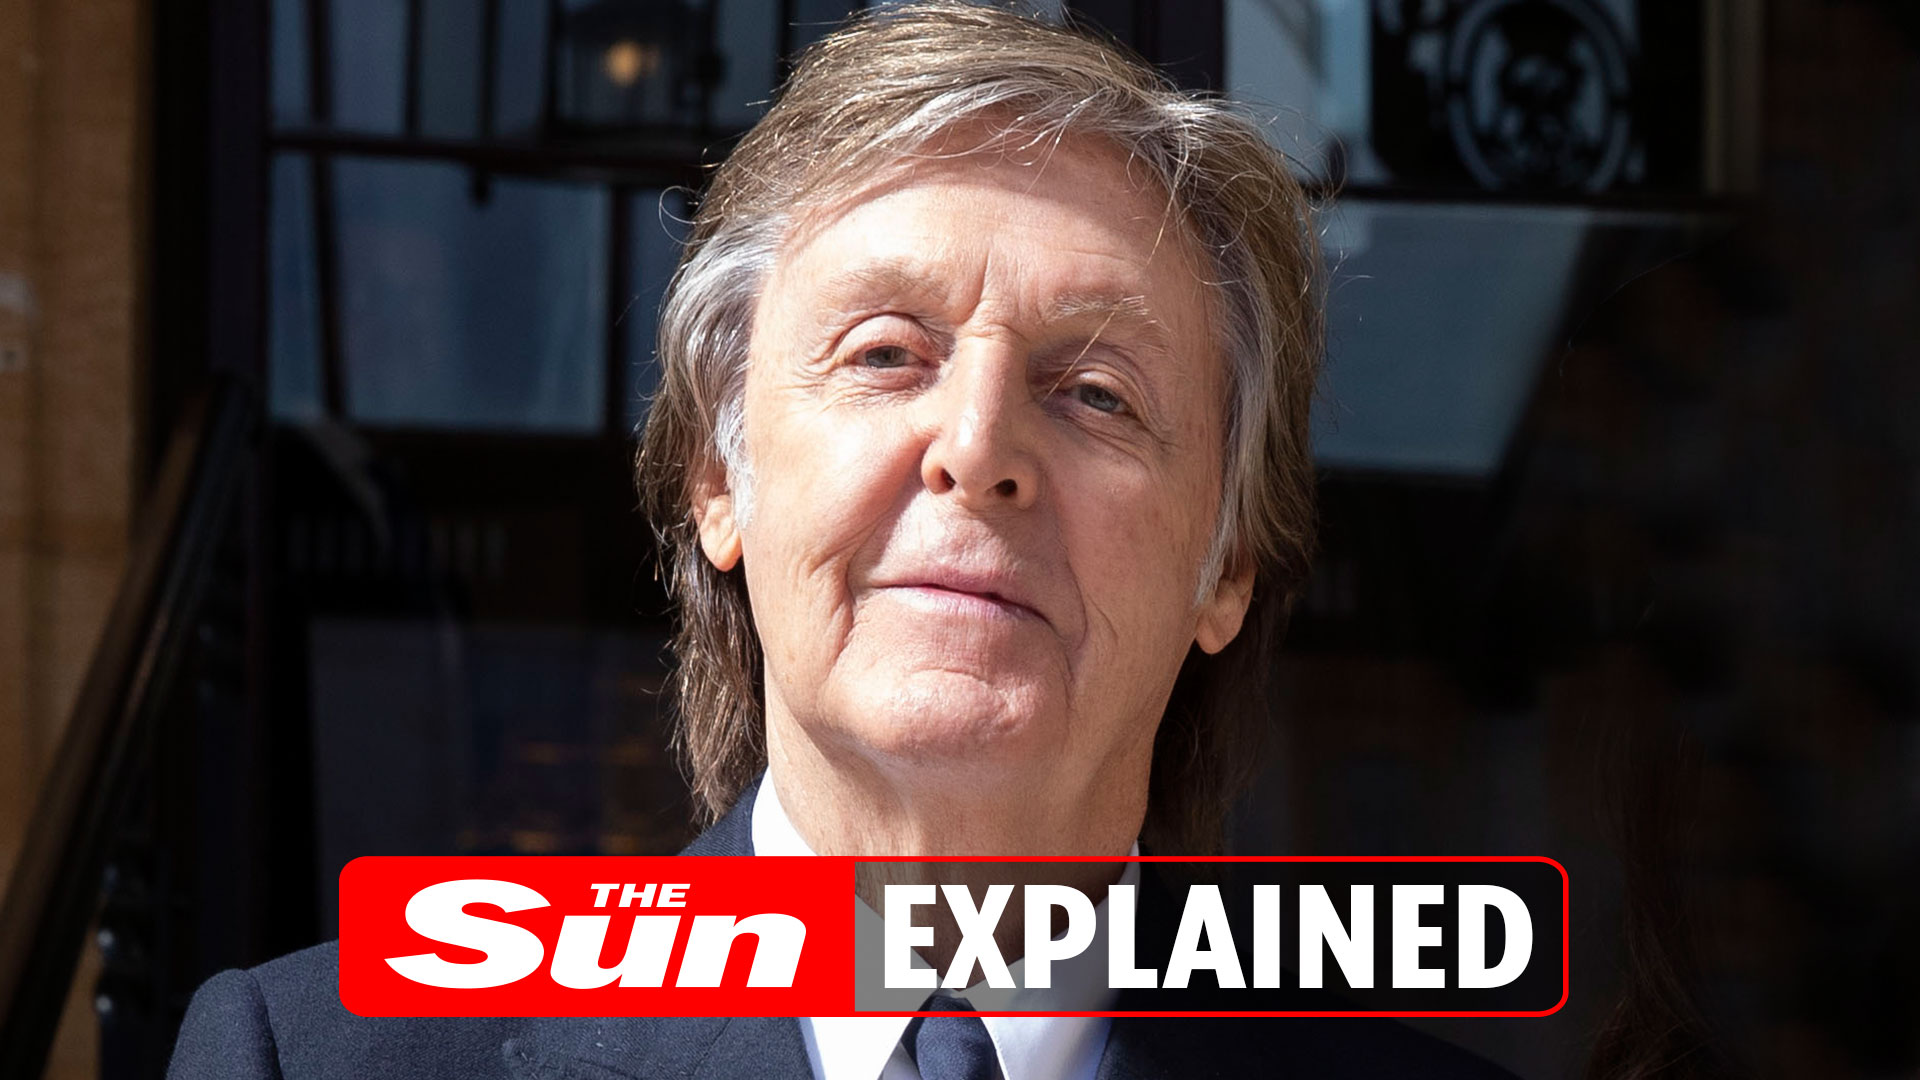 Discover Paul McCartney’s age and astounding net worth!